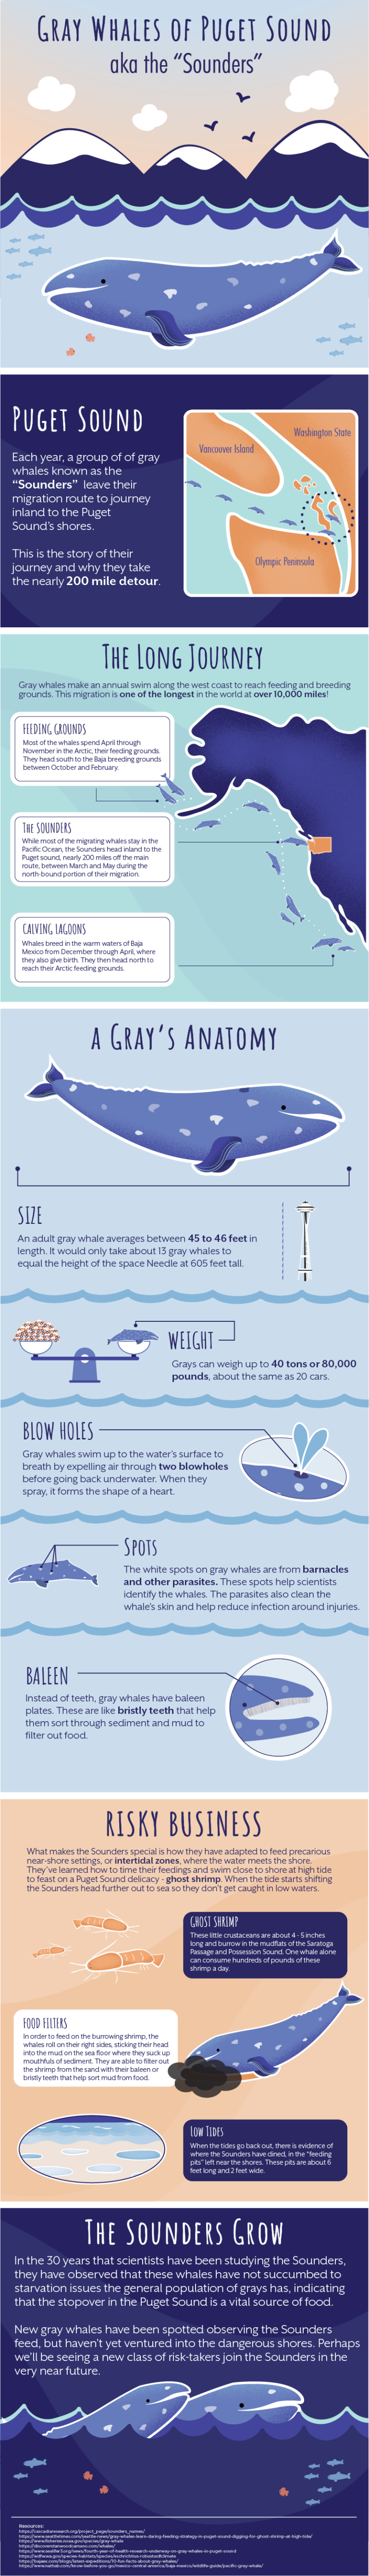 The Sounders - Gray Whales of Puget Sound